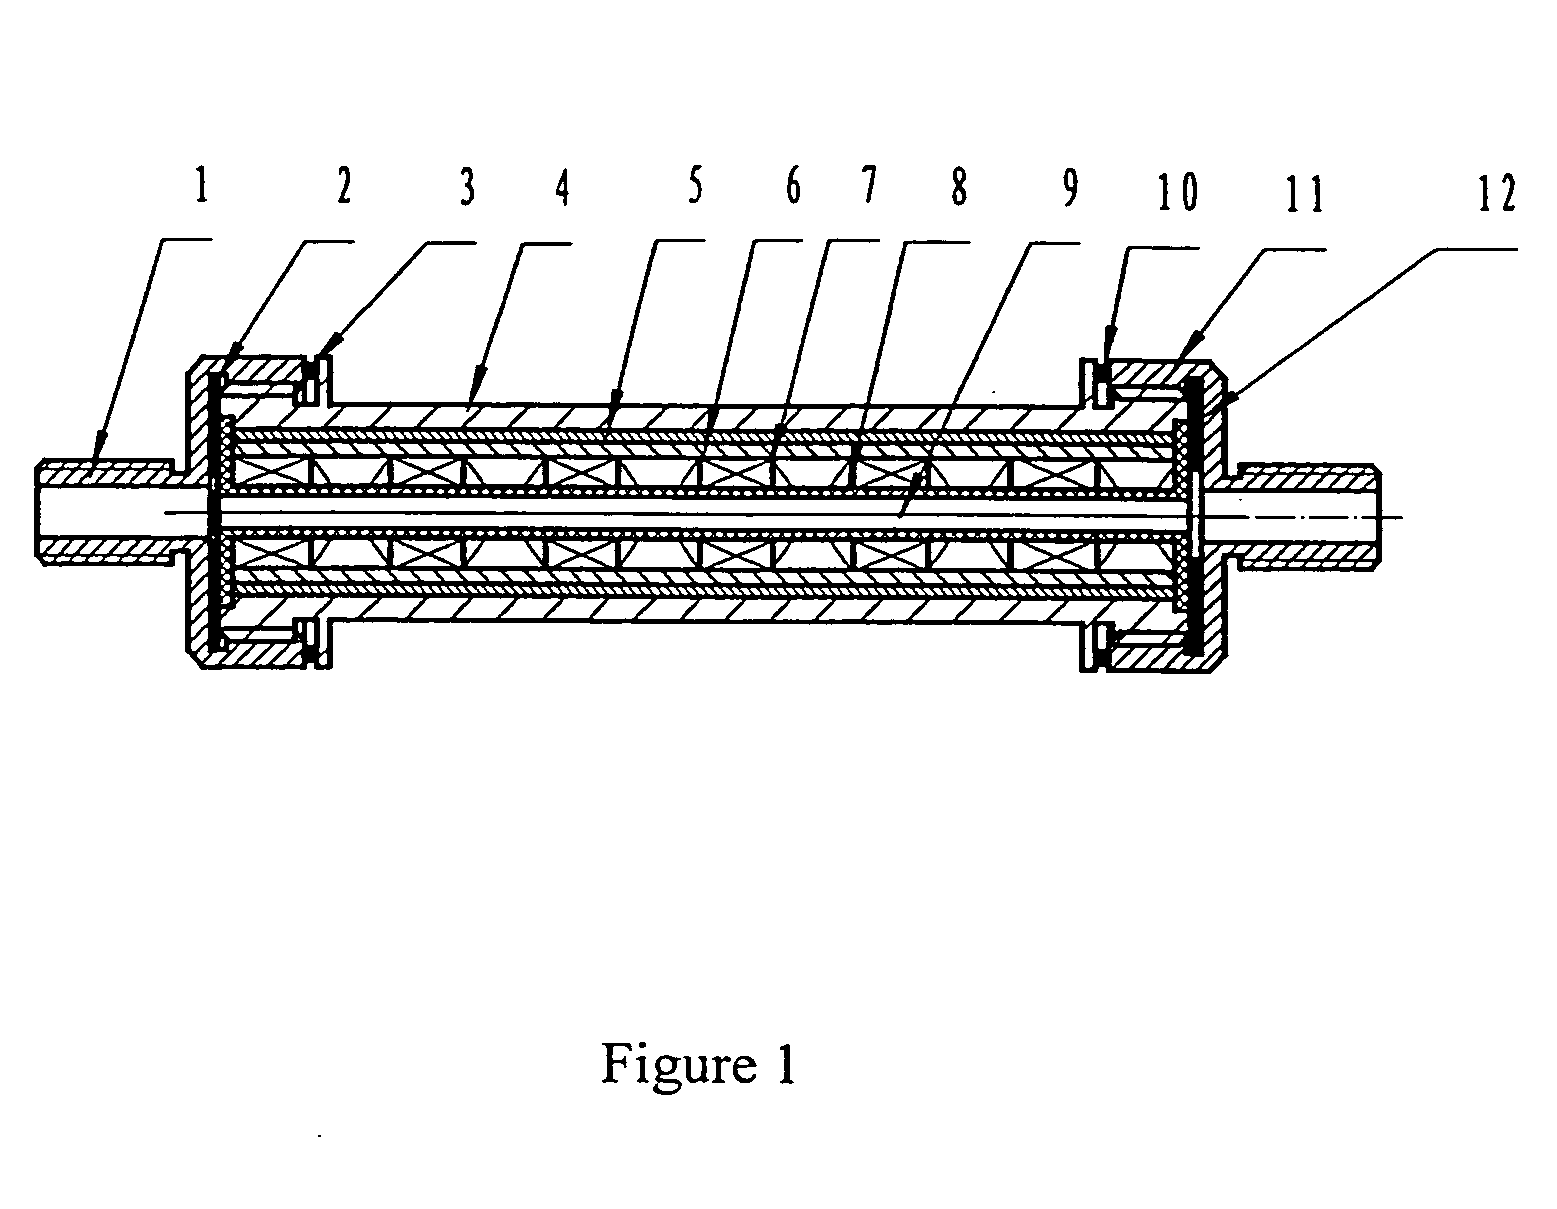 Apparatus for producing active water